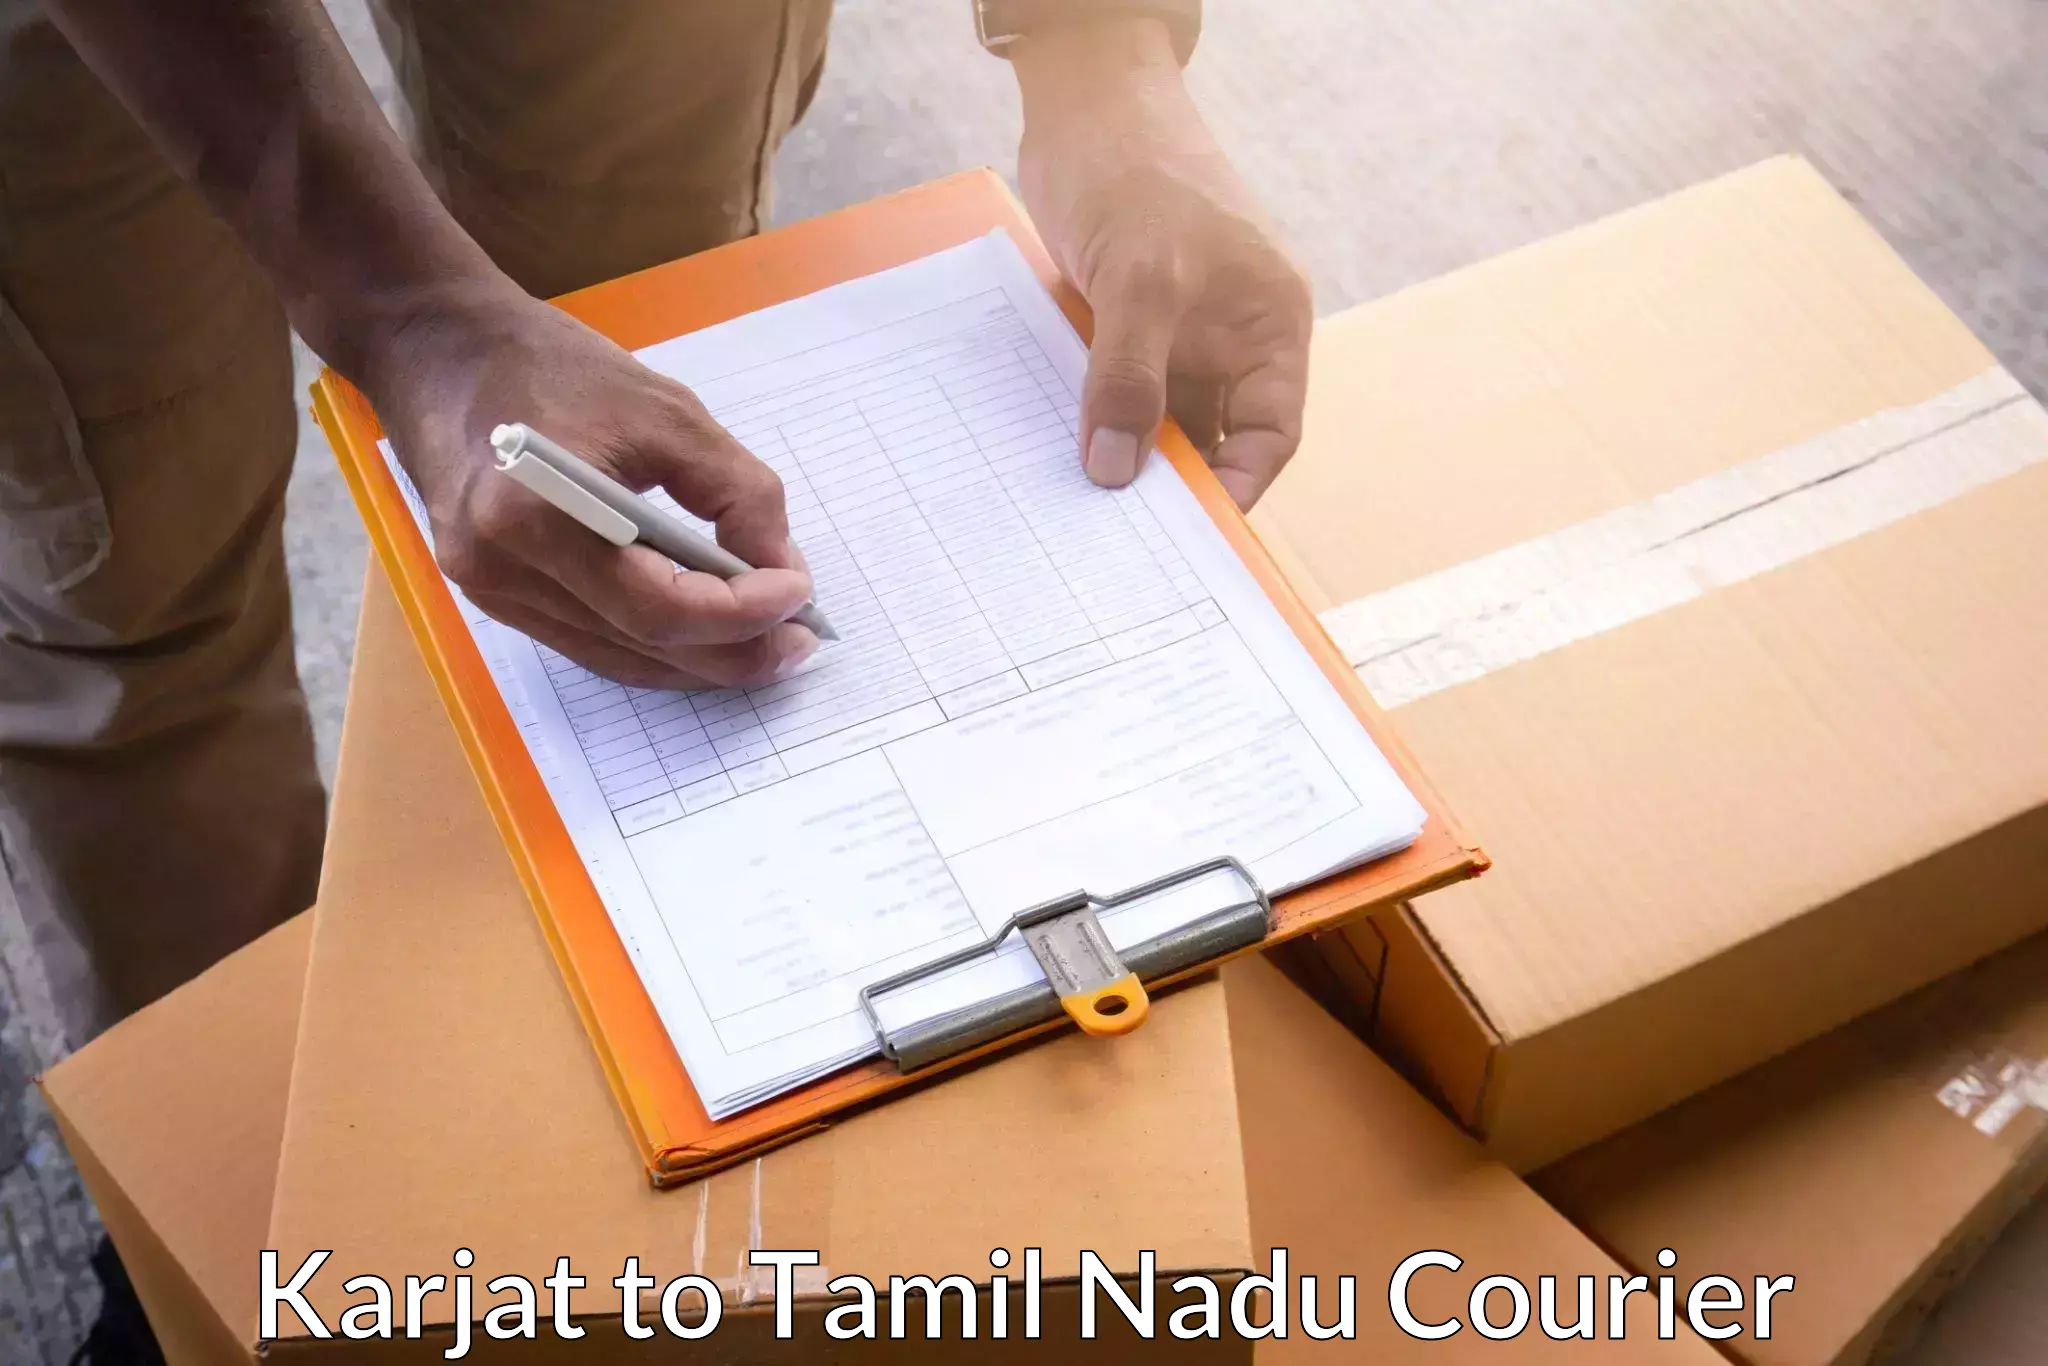 On-call courier service Karjat to Tuticorin Port